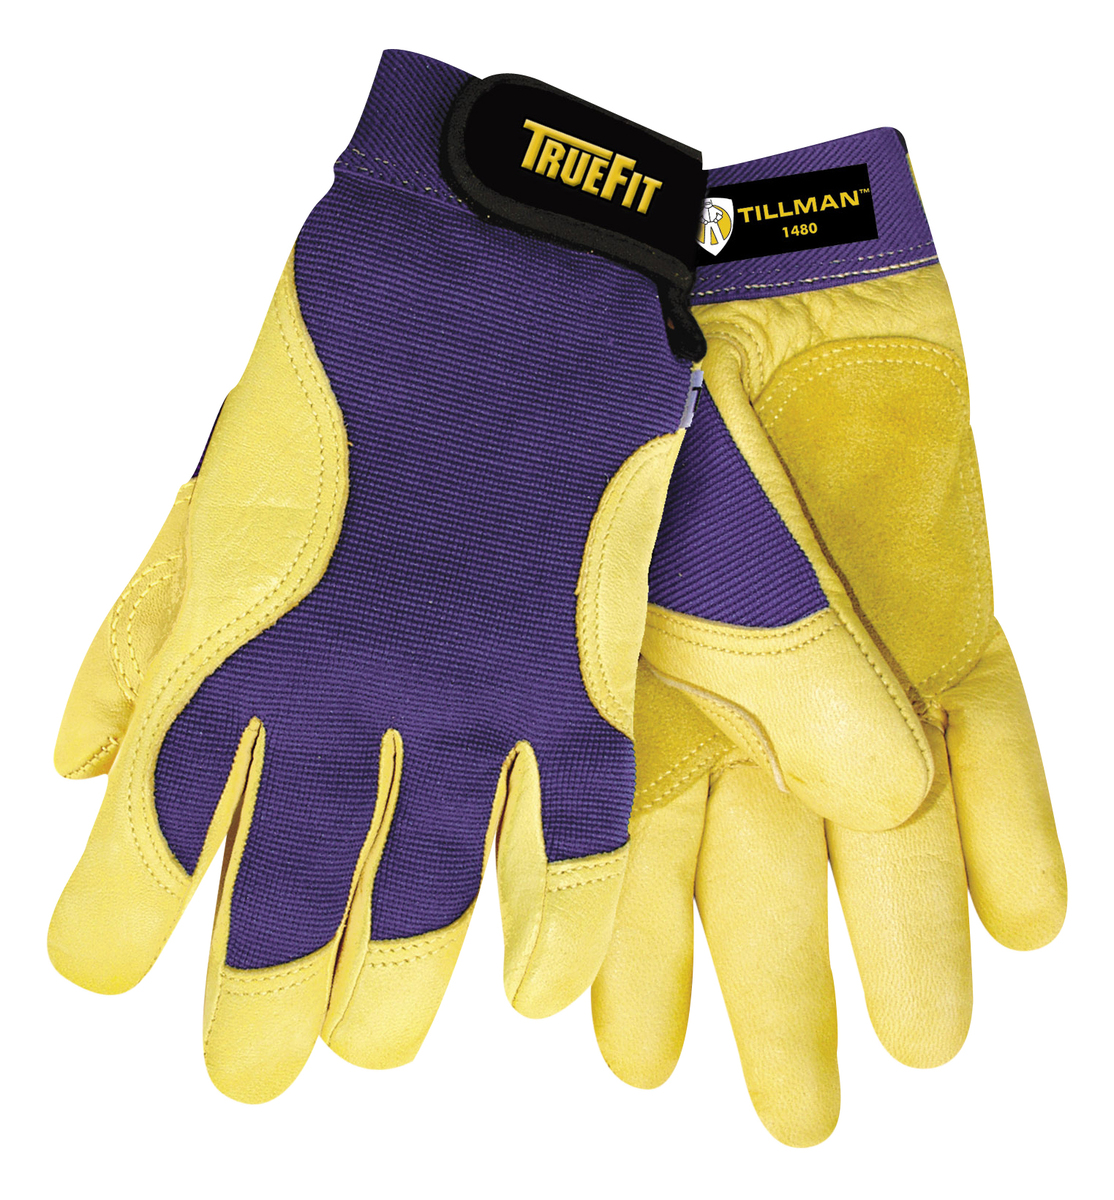 Tillman® Large Blue And Gold TrueFit™ Deerskin And Spandex® Full Finger Mechanics Gloves With Elastic/Hook And Loop Cuff